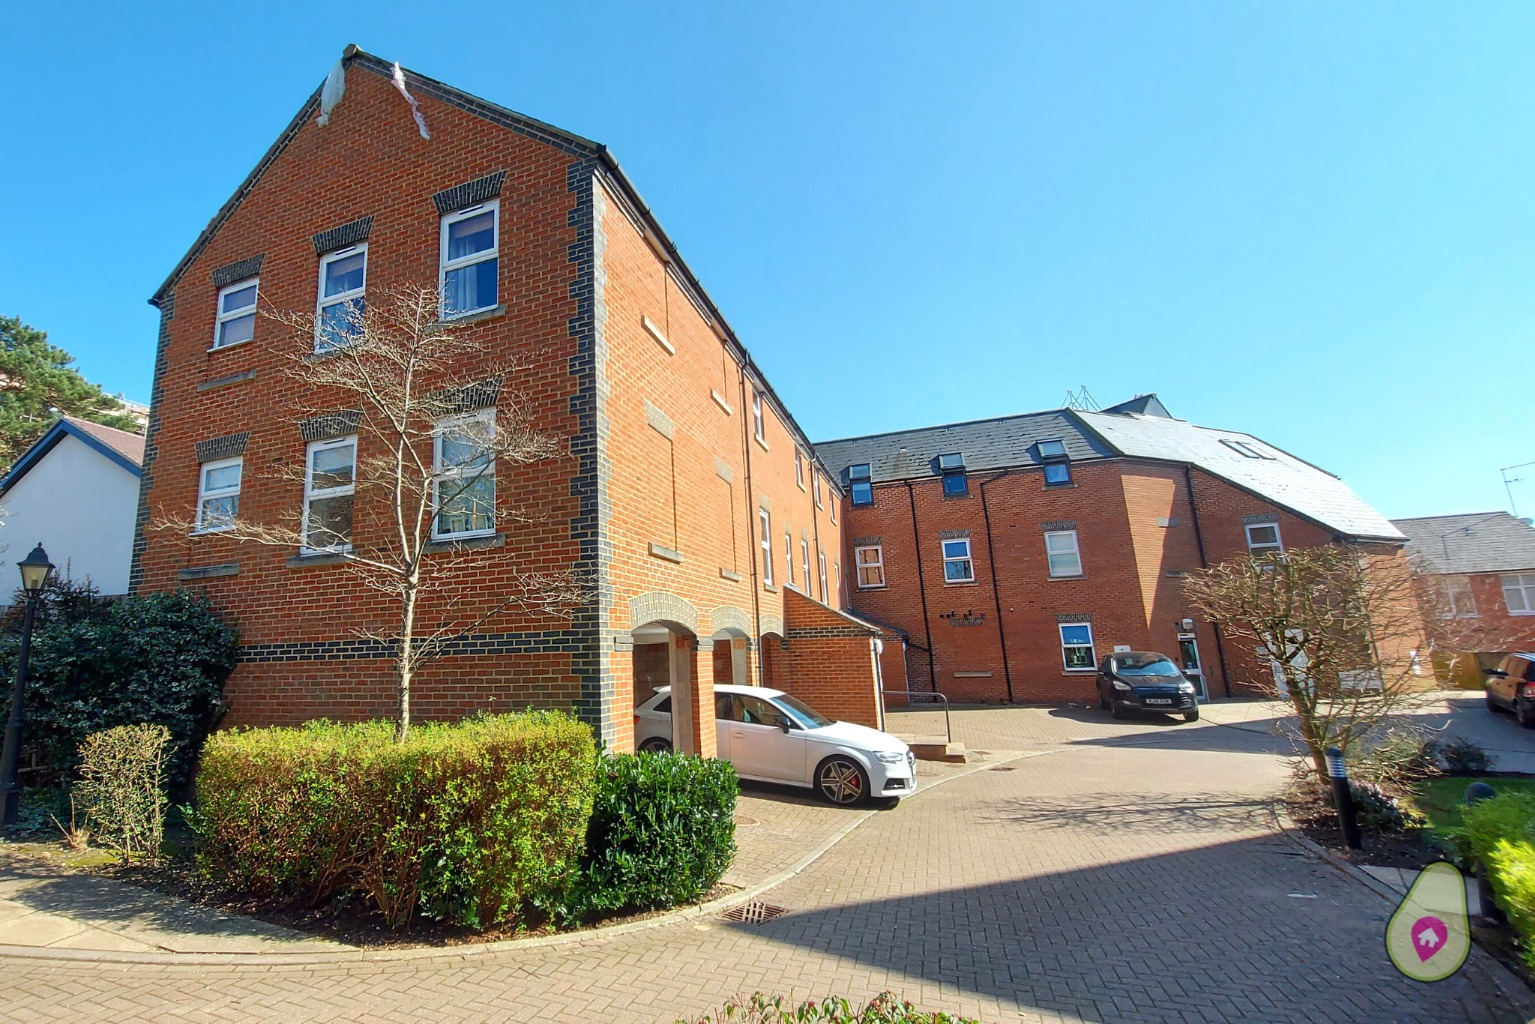 1 bed flat for sale - Property Image 1